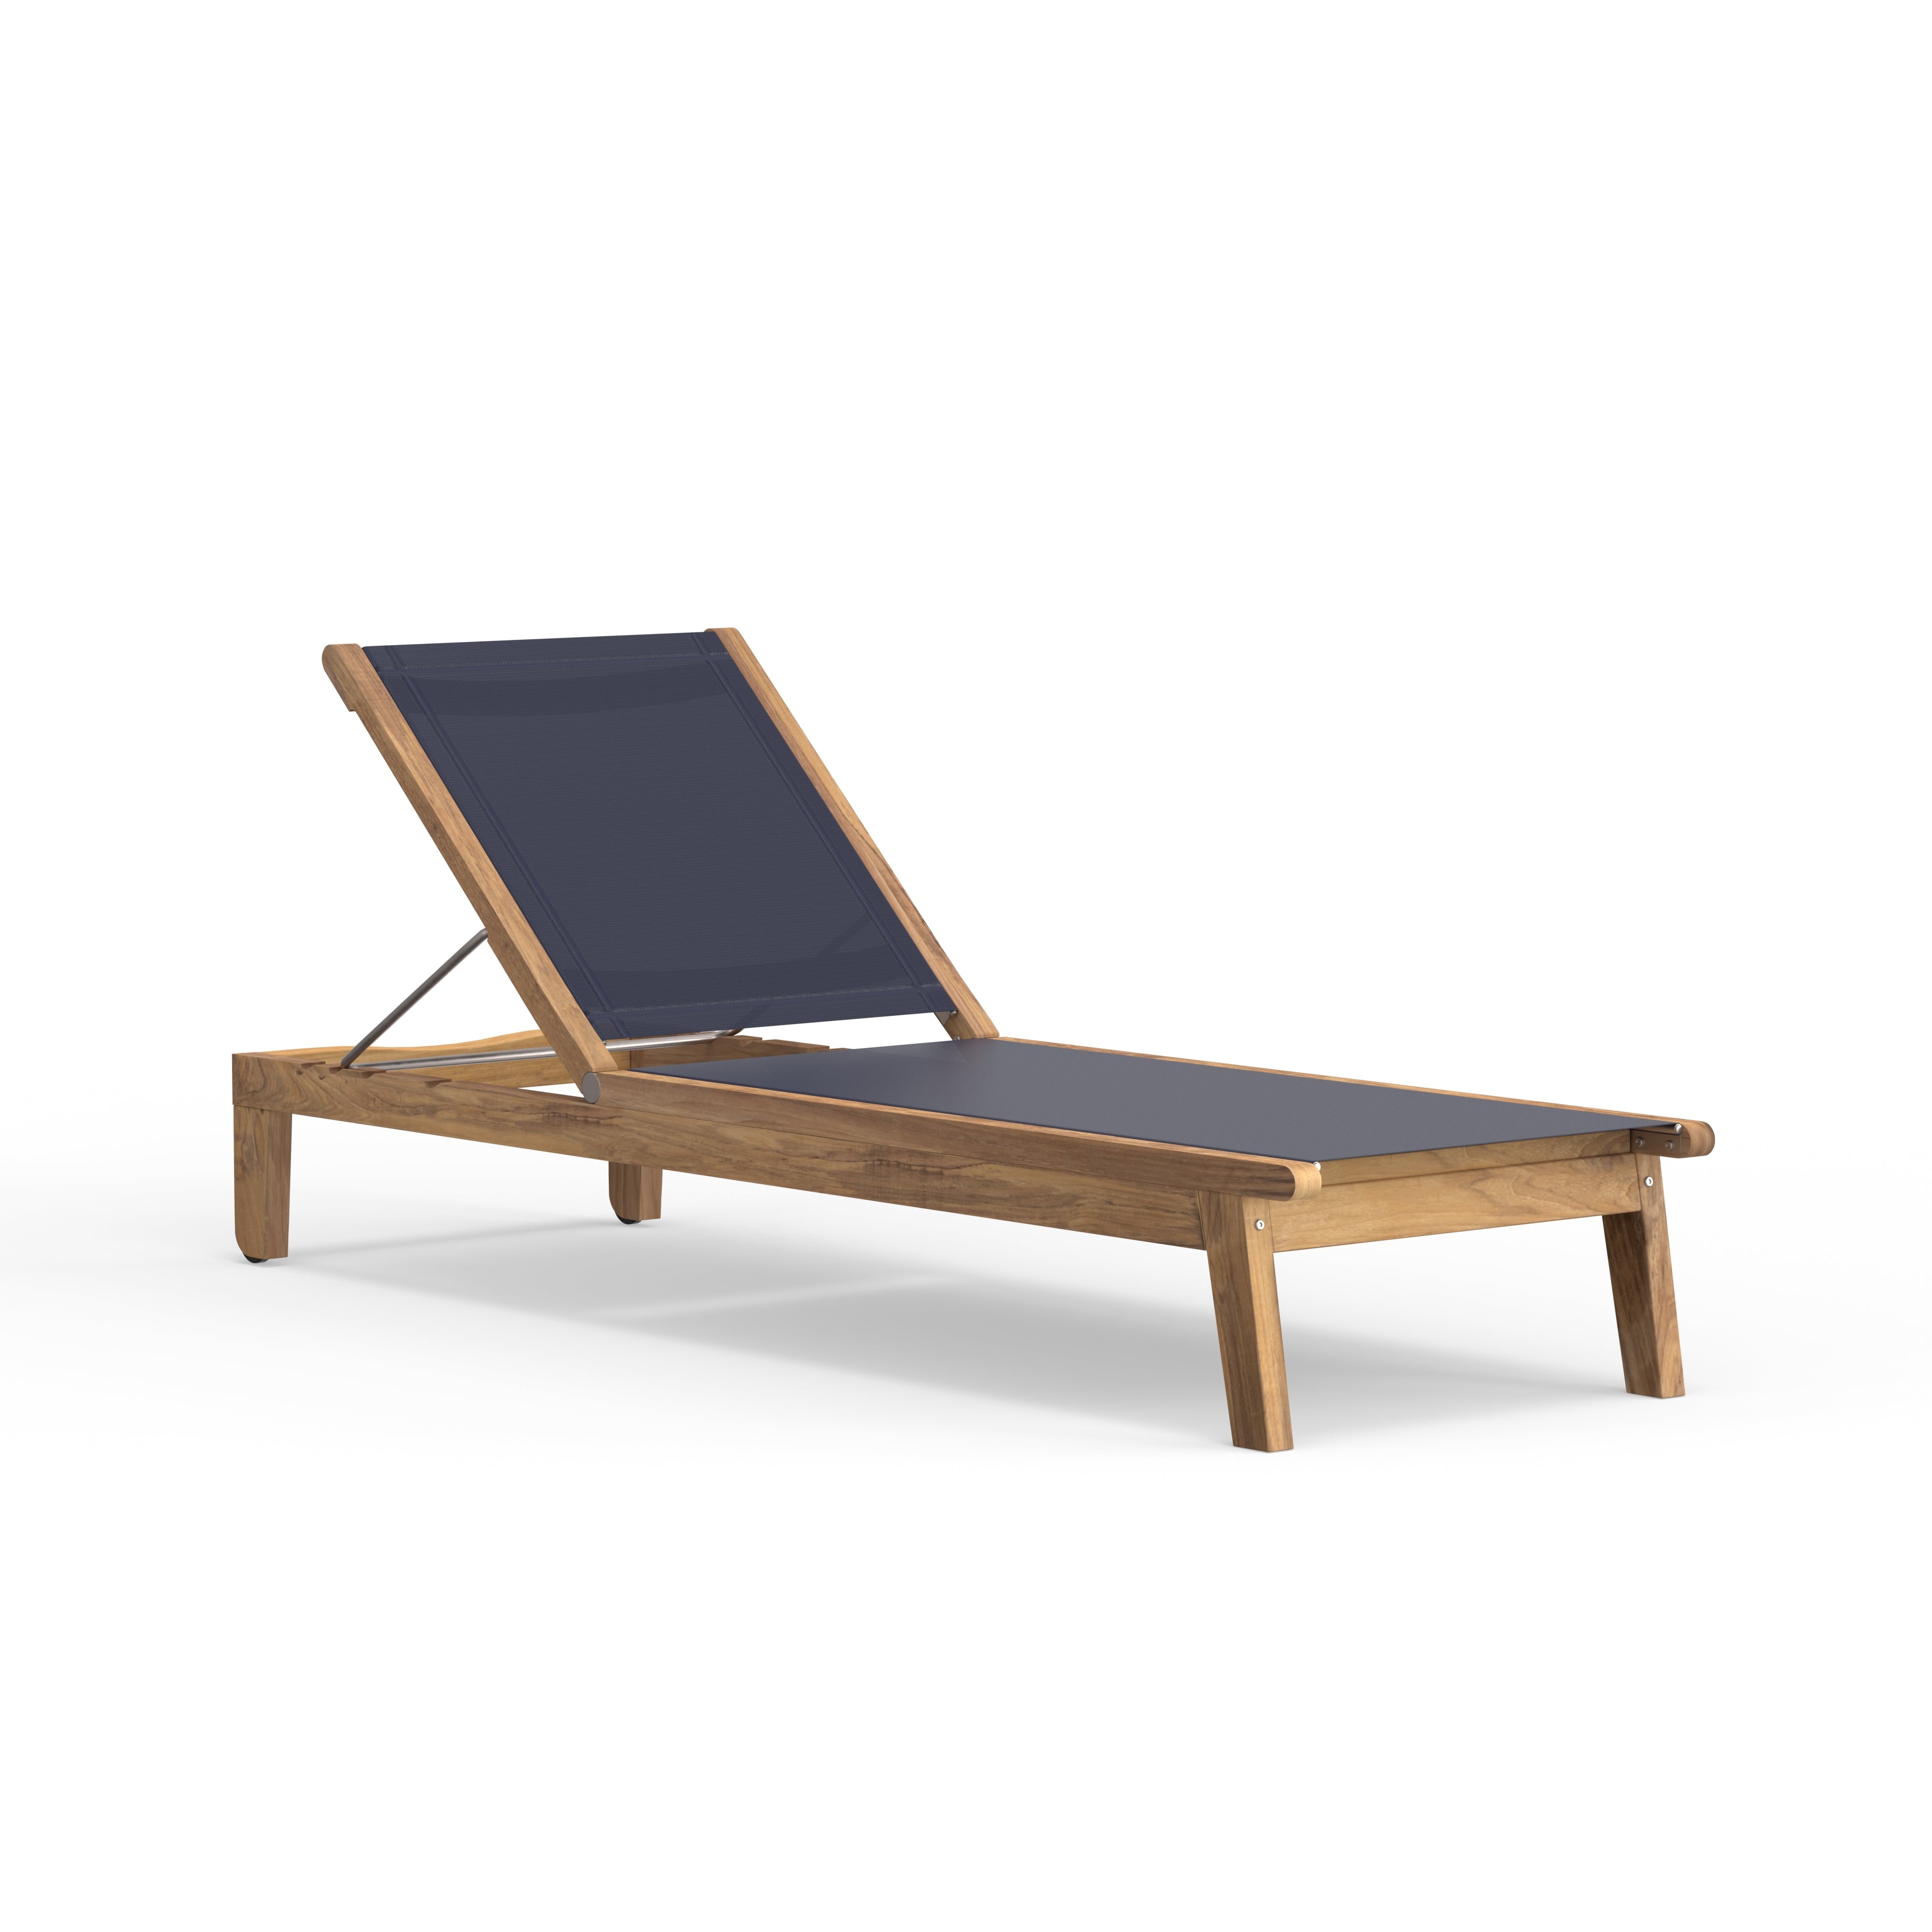 Navy Outdoor Chaise Lounge